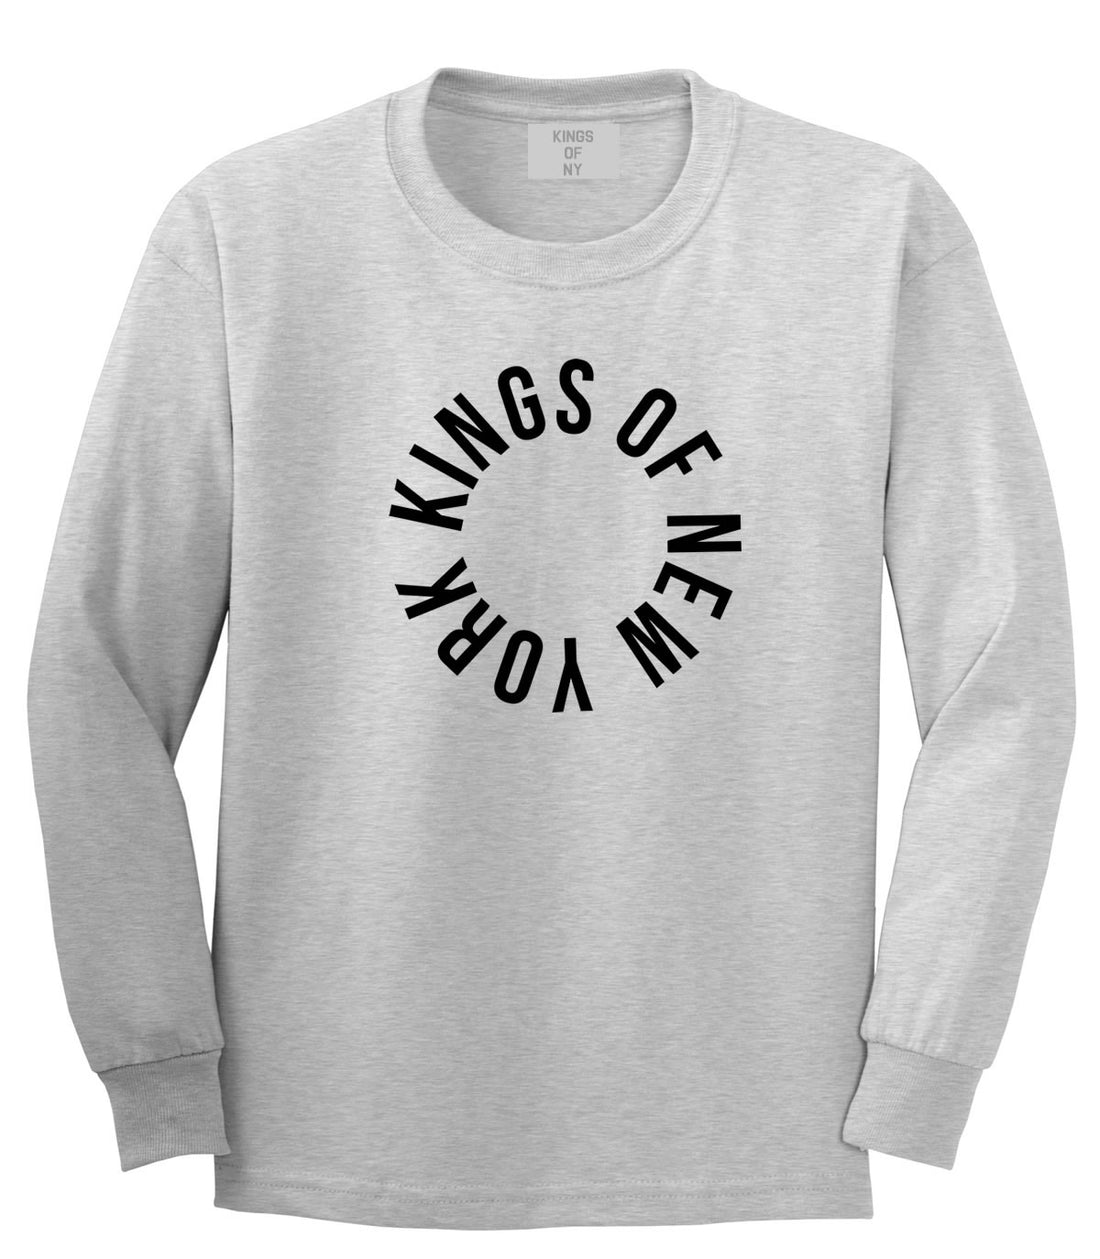 Kings Of NY Circle Logo New York Round About Long Sleeve T-Shirt in Grey